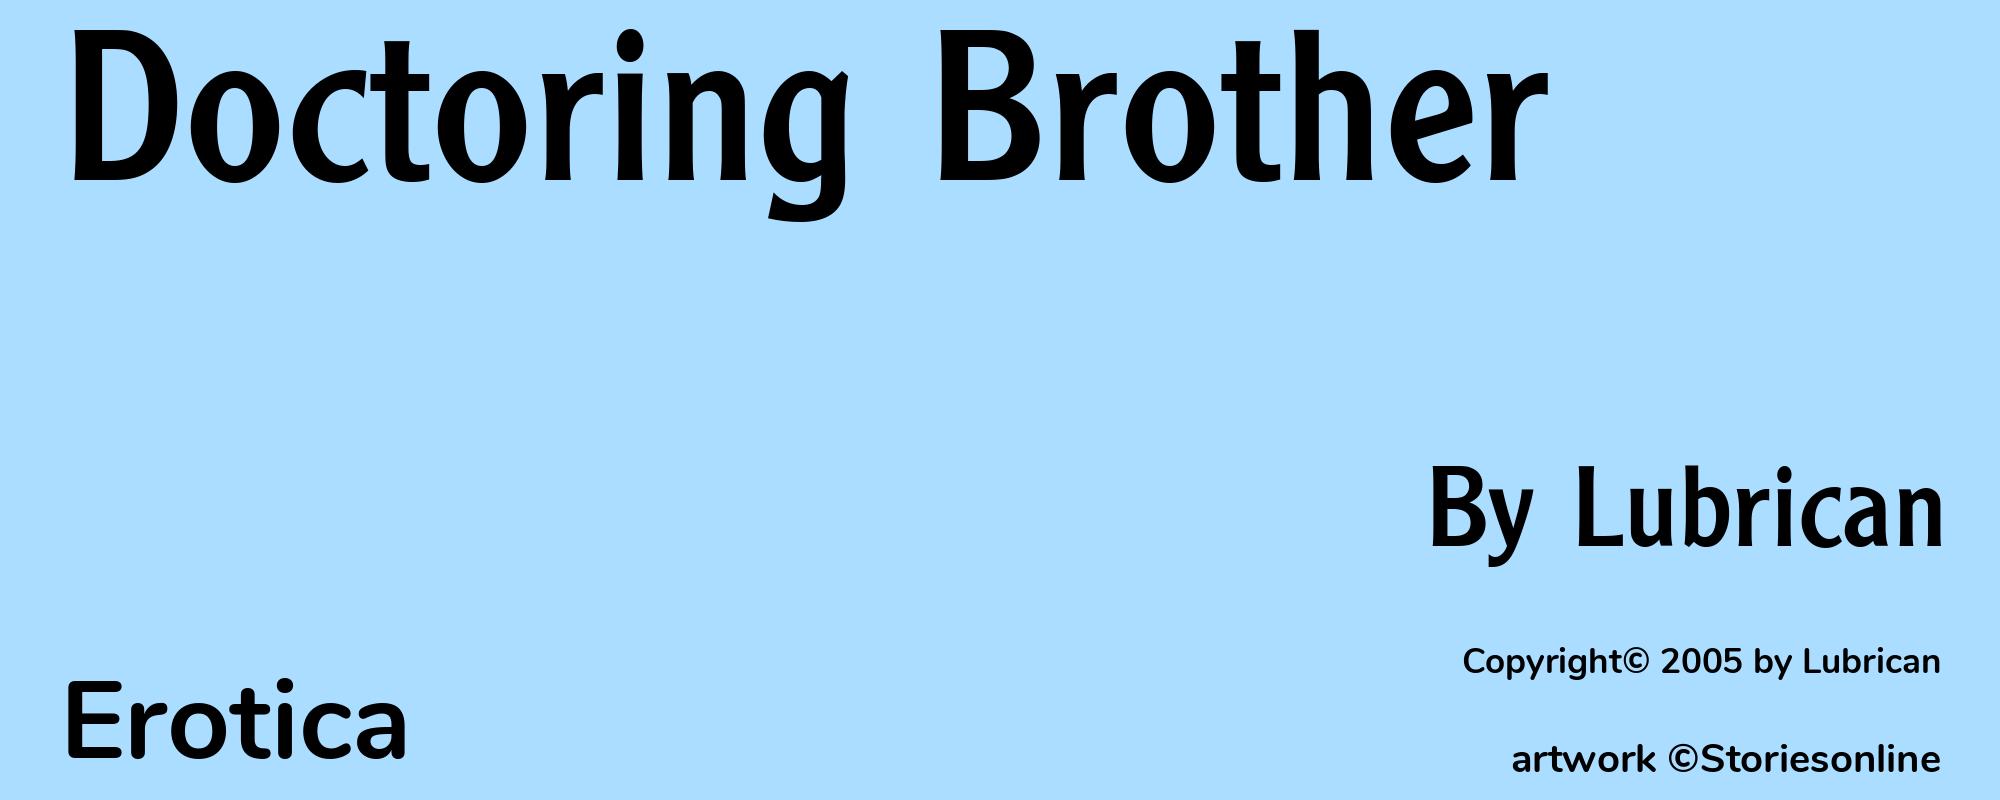 Doctoring Brother - Cover